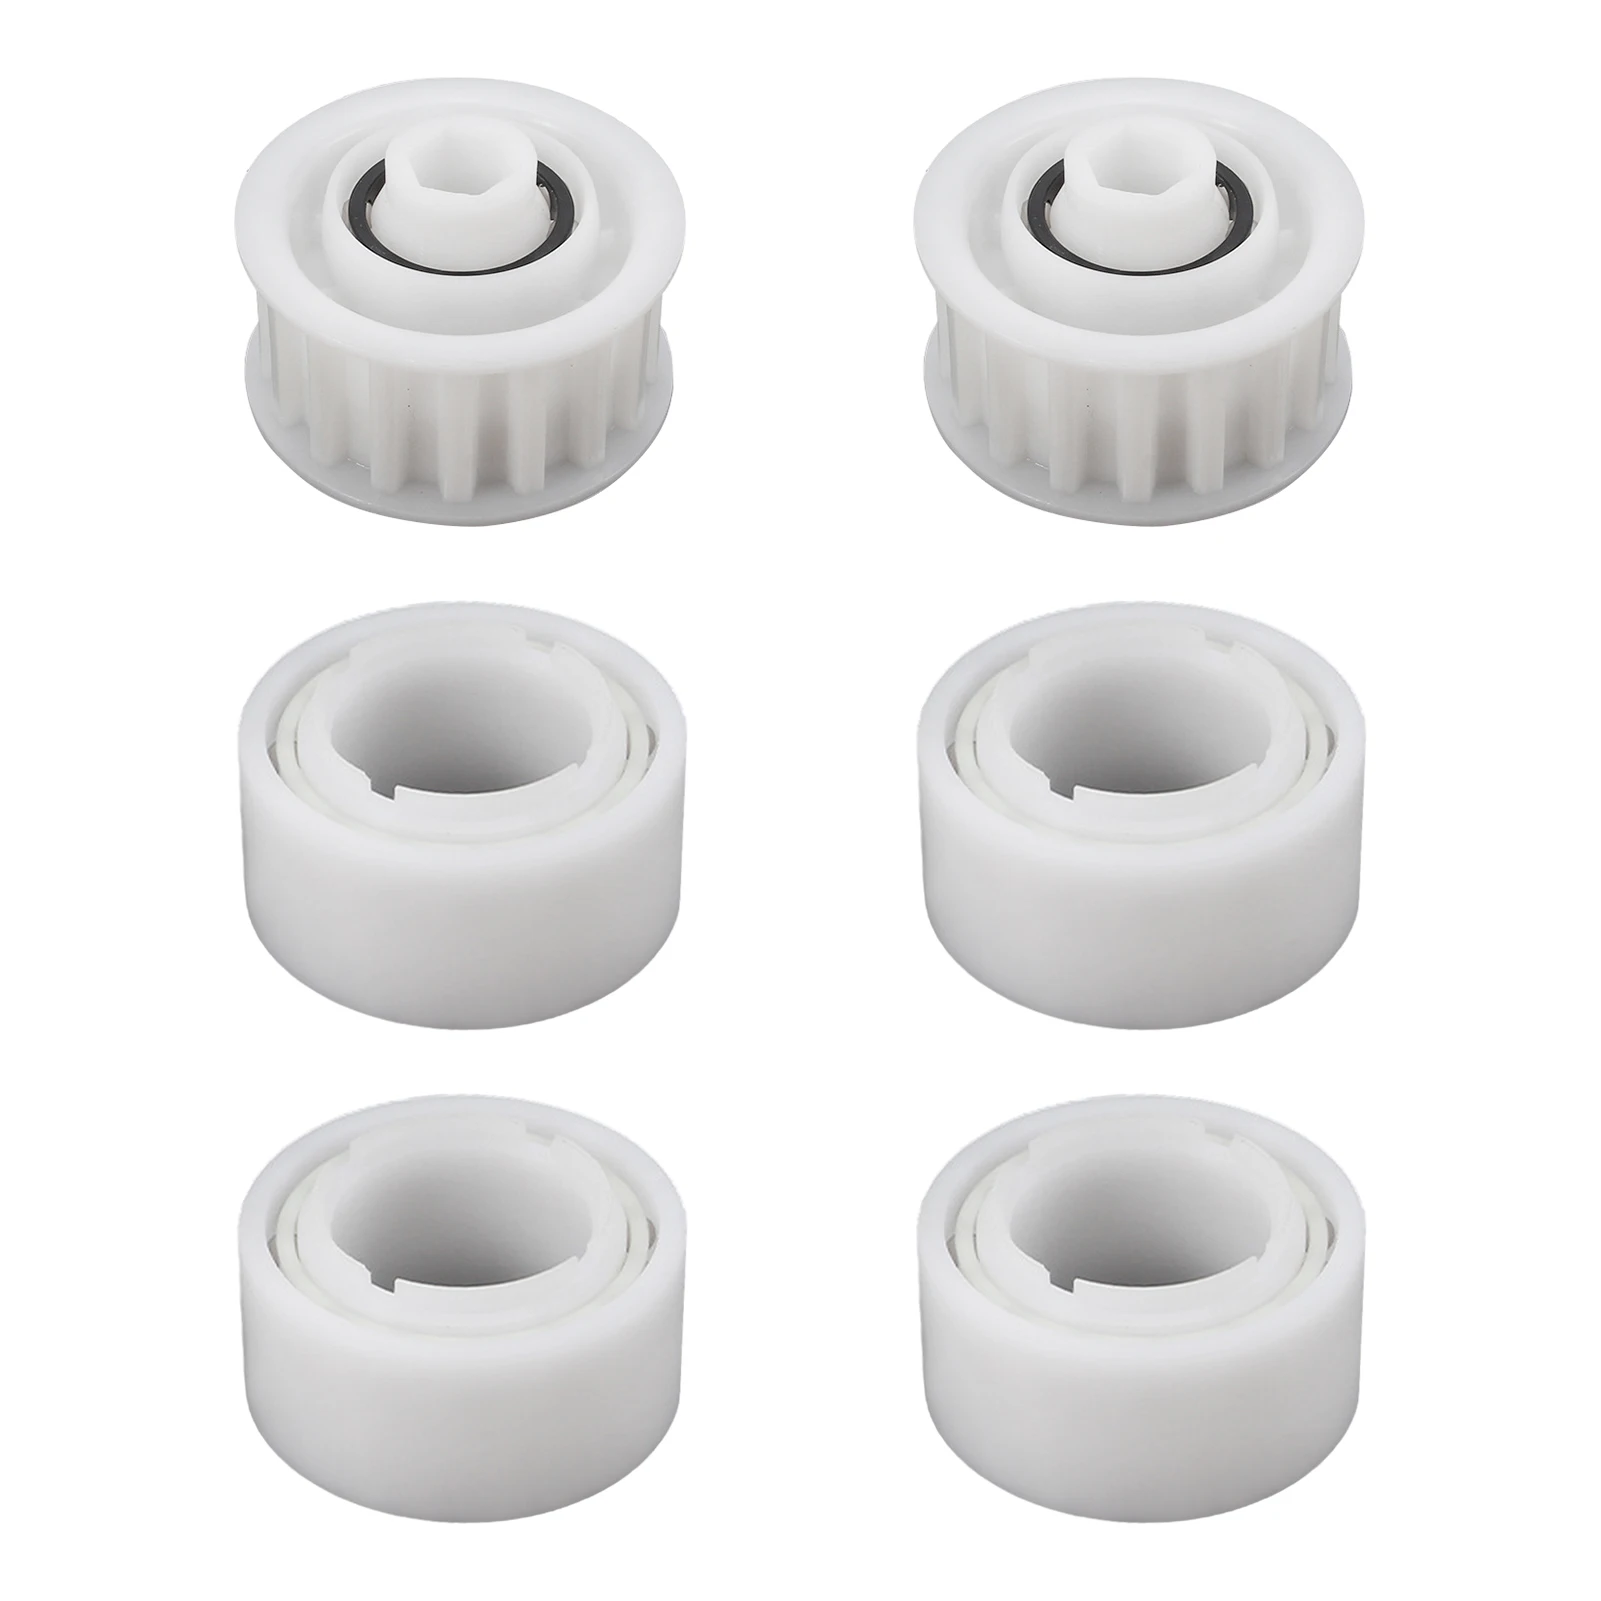 4pcs White Guide Wheel Portable Pool Cleaner Tool Accessories Practical 2 Pully Gears Plastic Lightweight Replacement Lifting